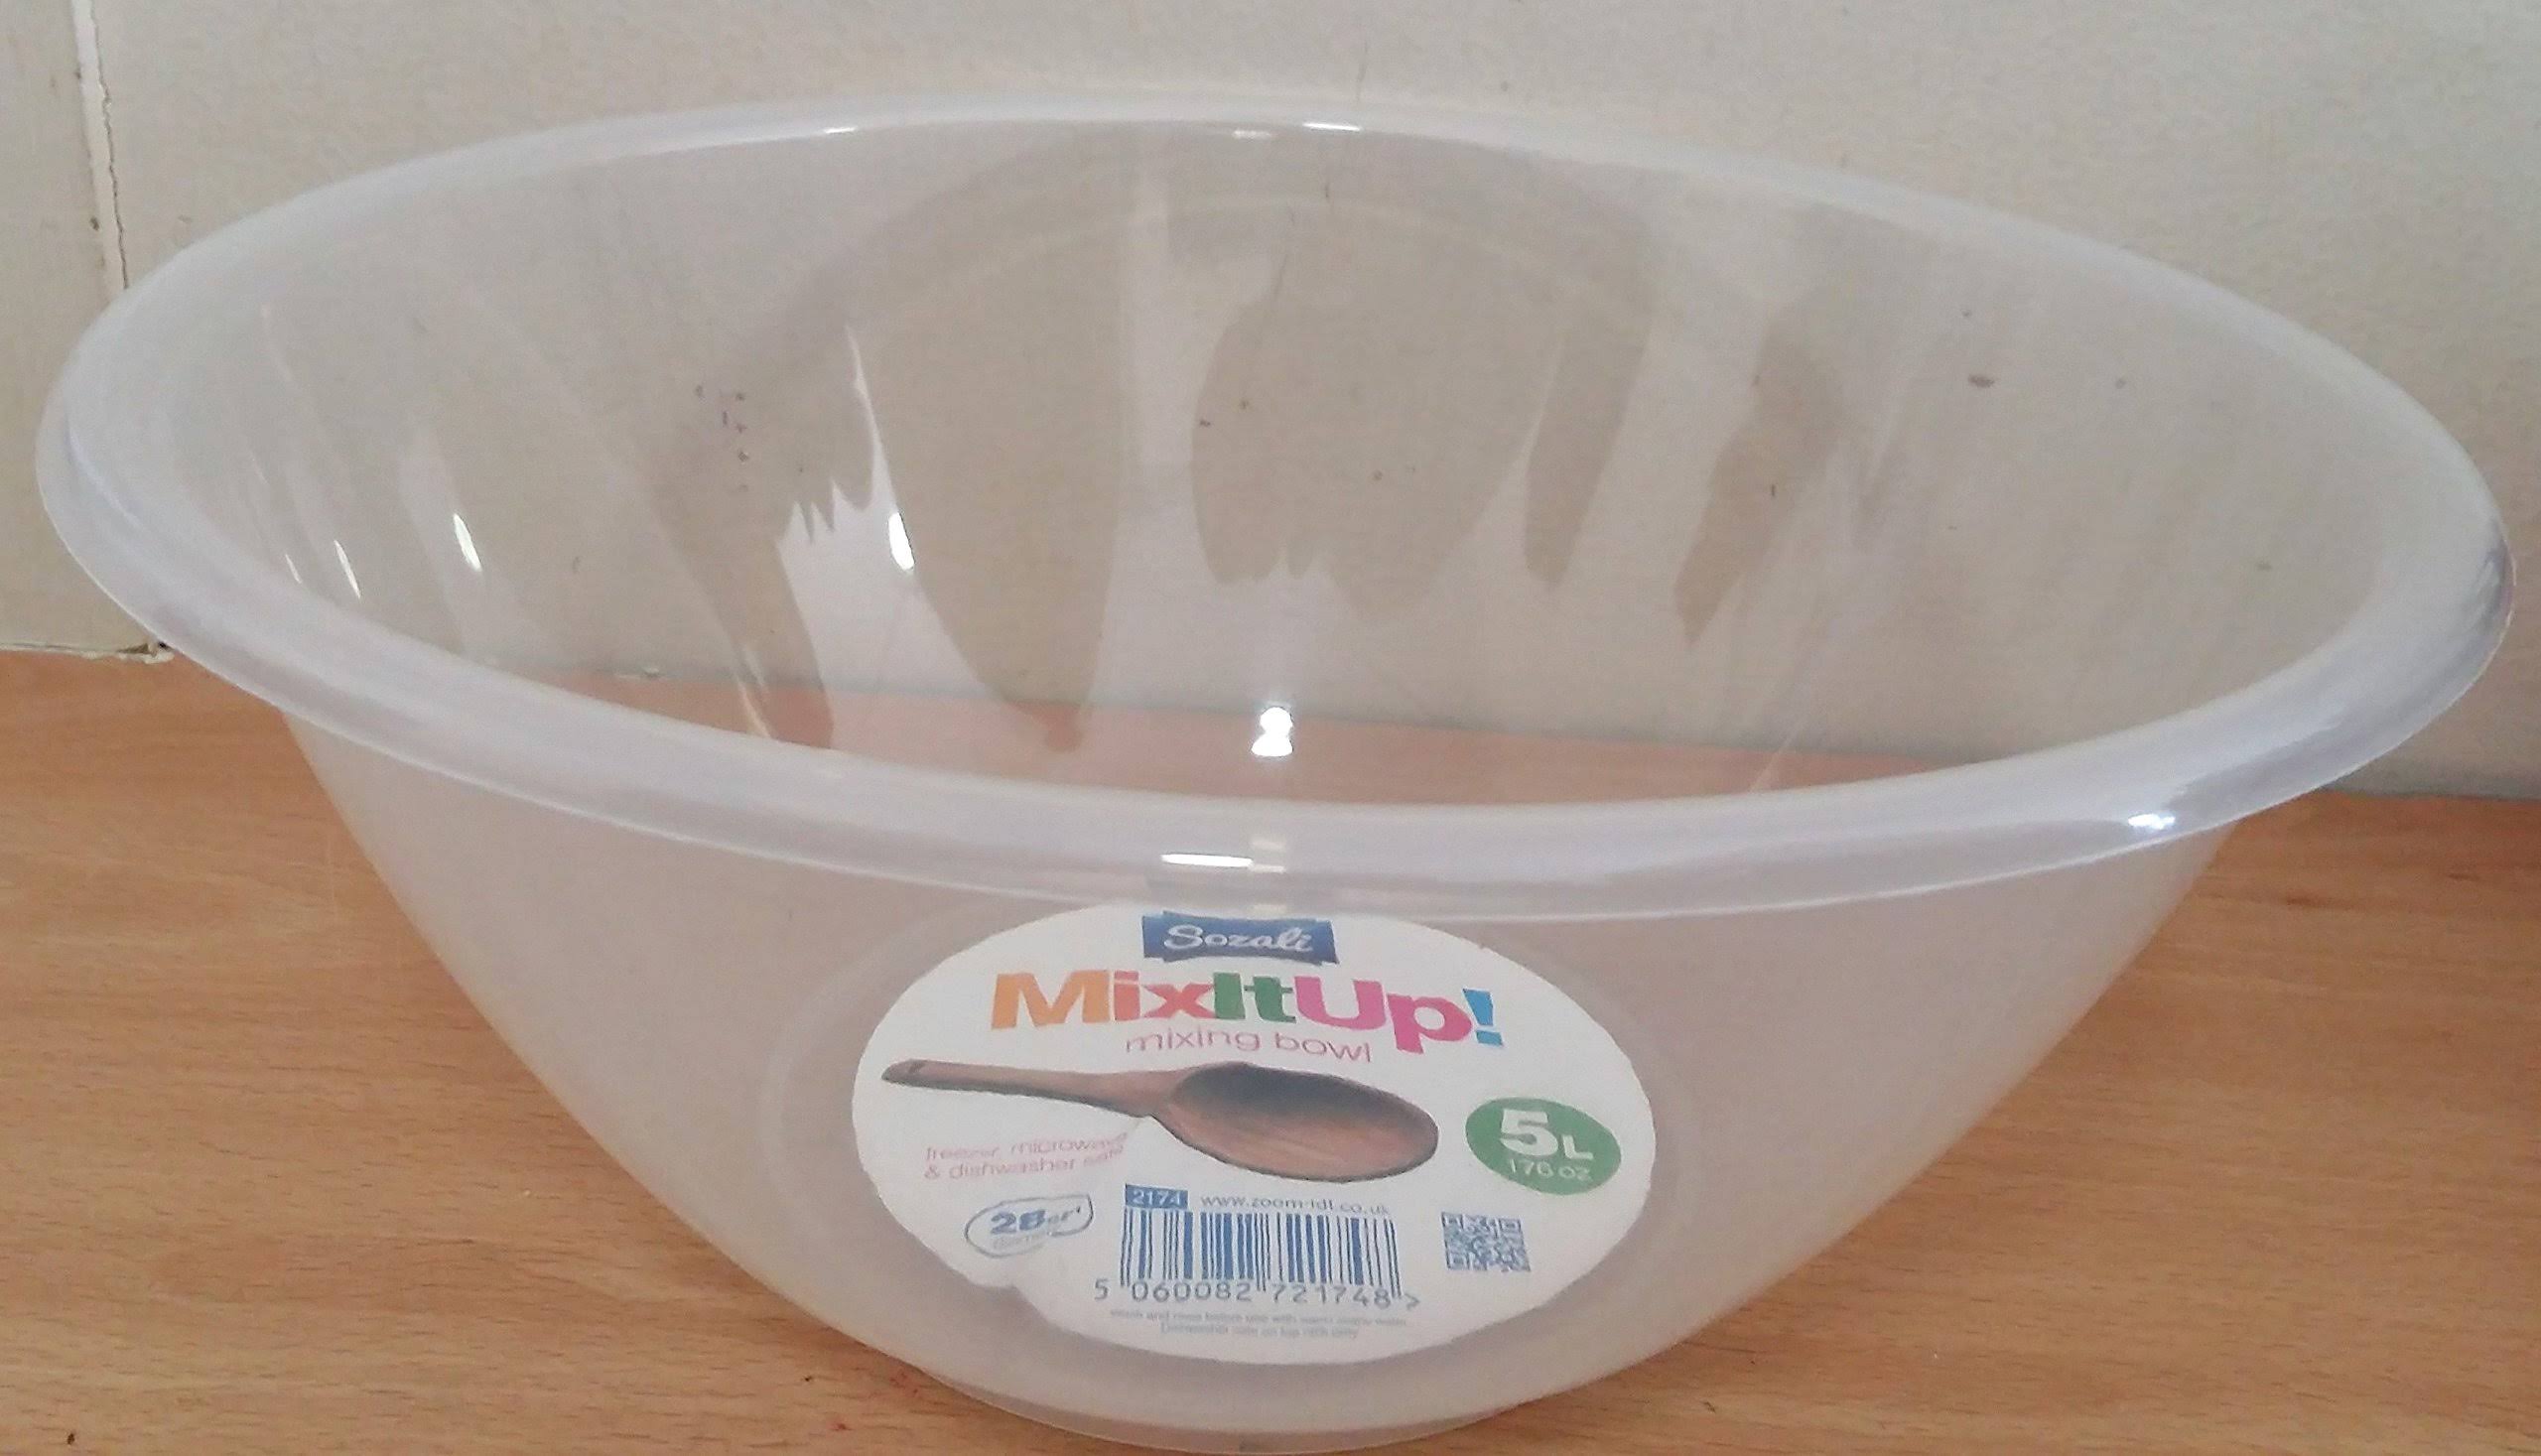 MUQU Mixing Bowl, Plastic - 5L, 28cm - for Baking, Kitchen, Cooking Pack of 2